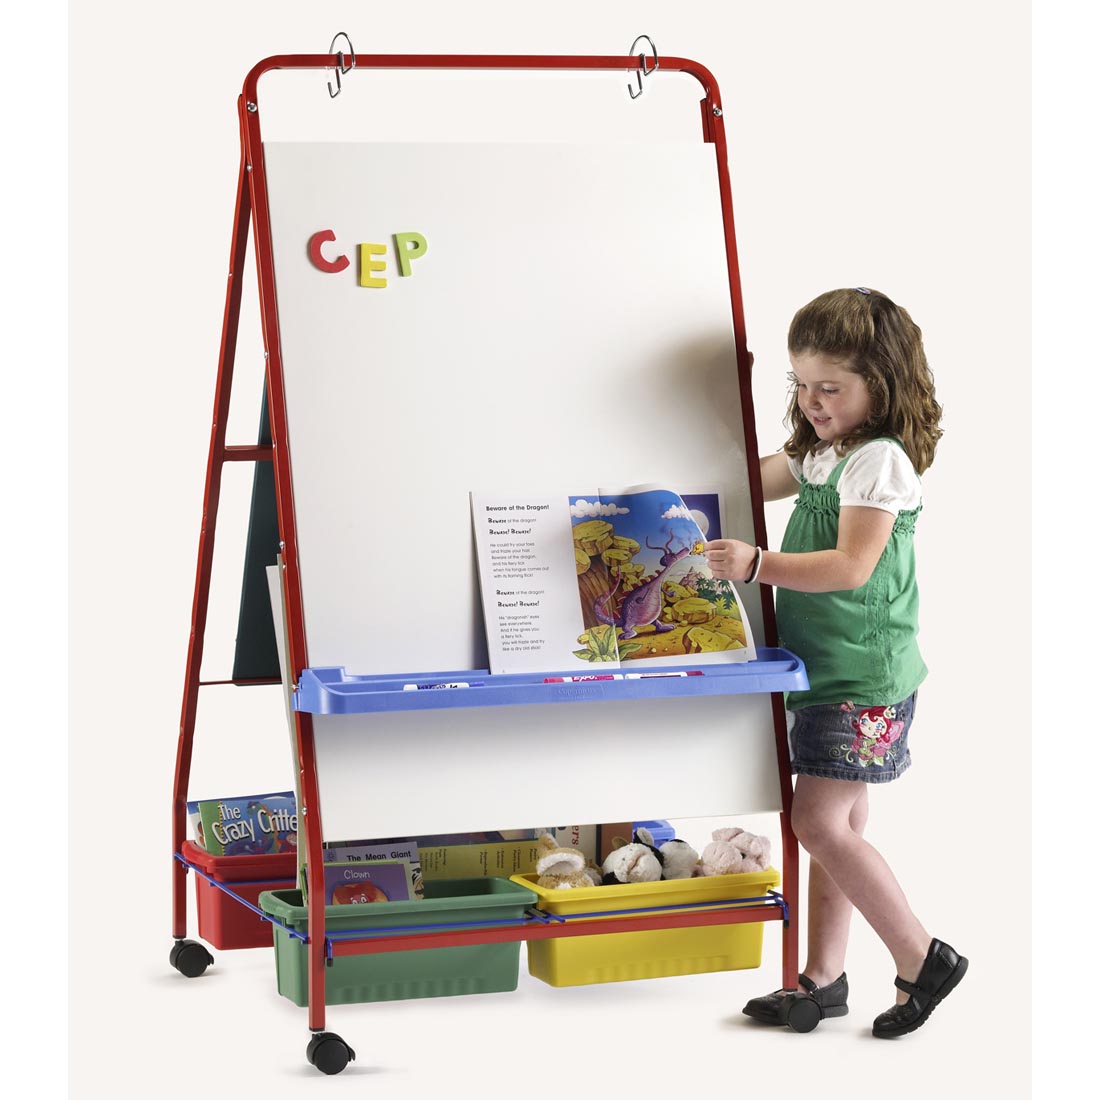 Child Looking at a Book on the Primary Teaching Easel